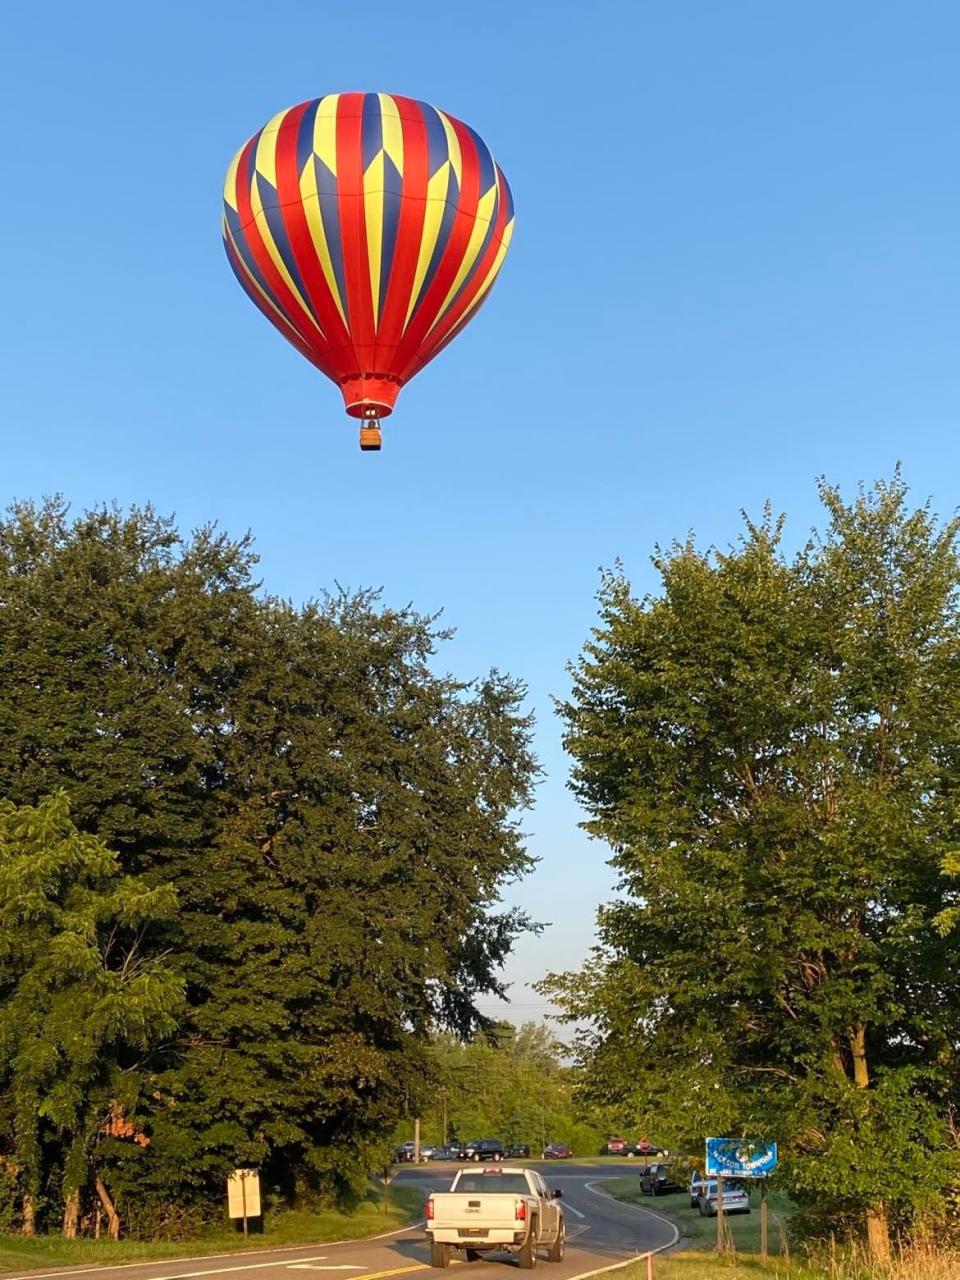 The Balloon Classic presented by Aultman is 4 to 10 p.m. on Friday and Saturday. Weather dependent, balloons launch from the campus area of Kent State University at Stark and Stark State College in Jackson Township.